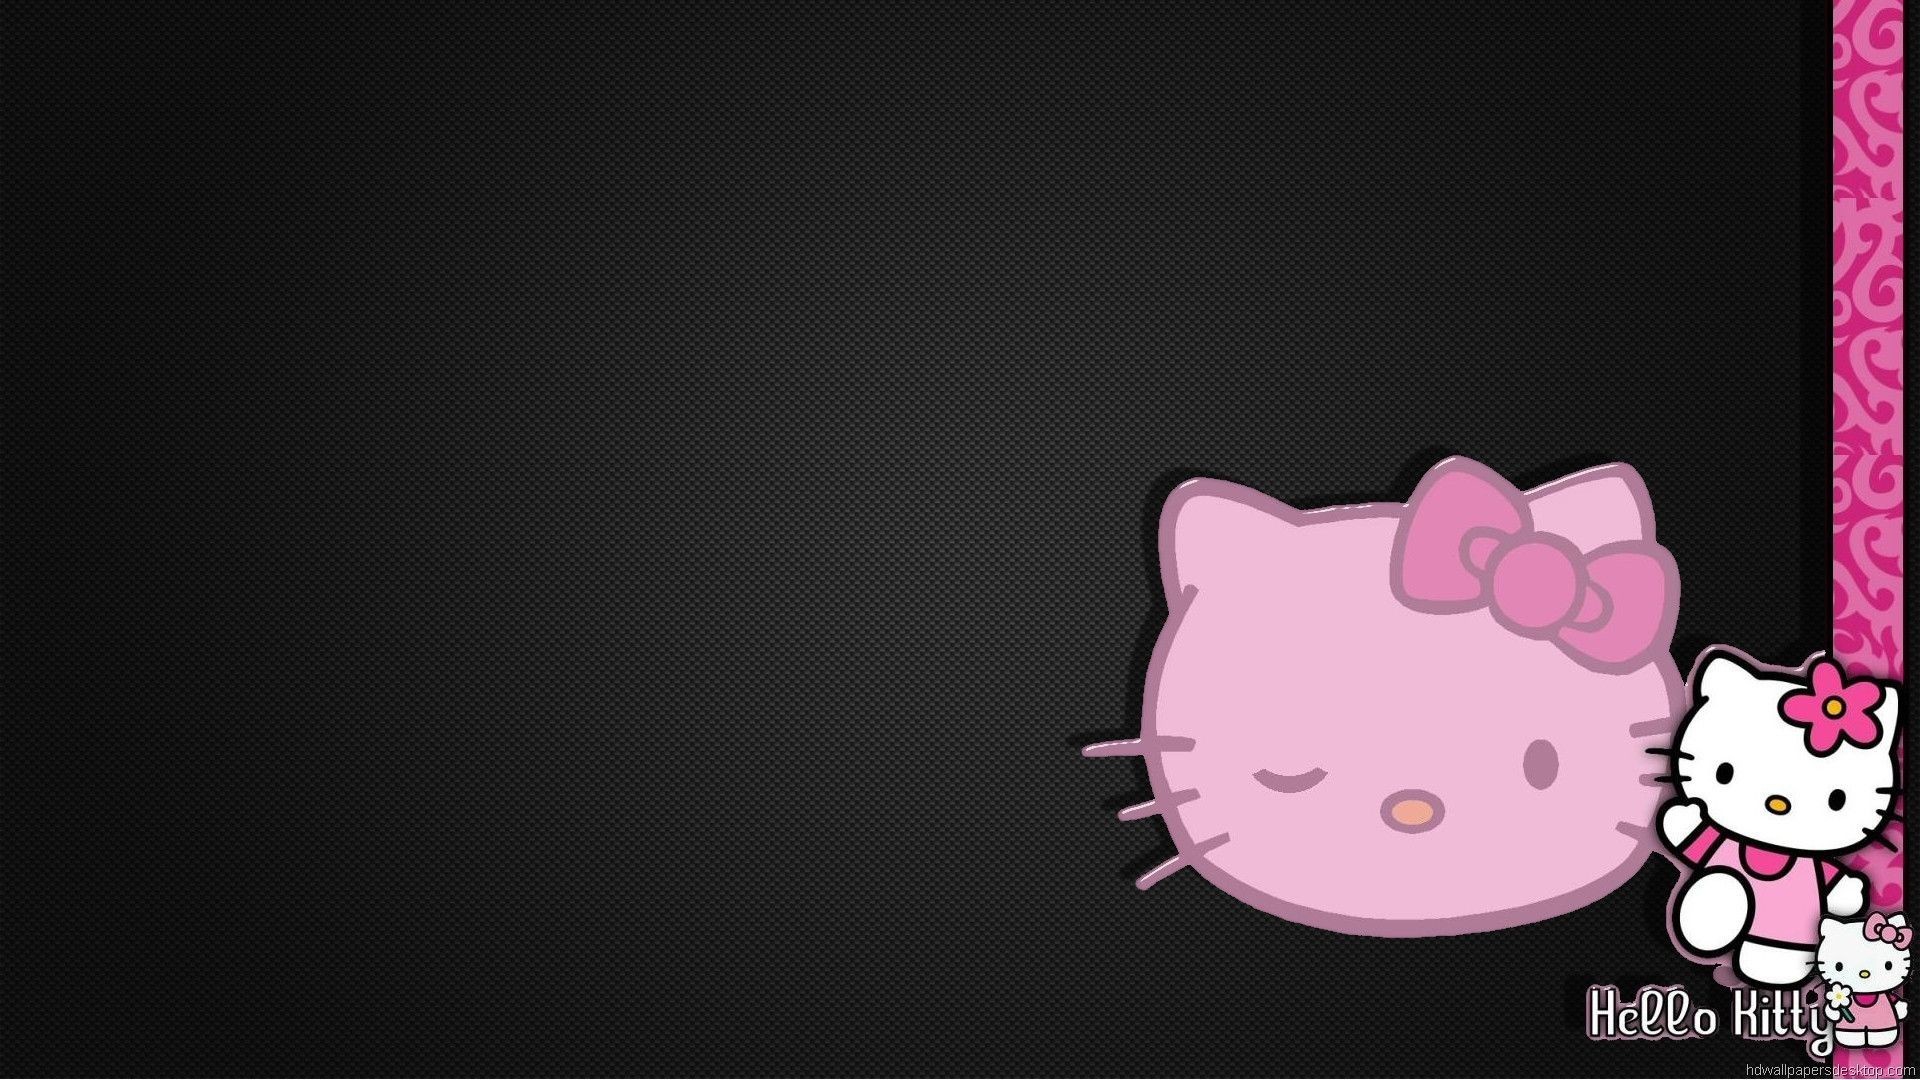 1920x1080 Pink And Black Hello Kitty Backgrounds - Wallpaper Cave | Images .